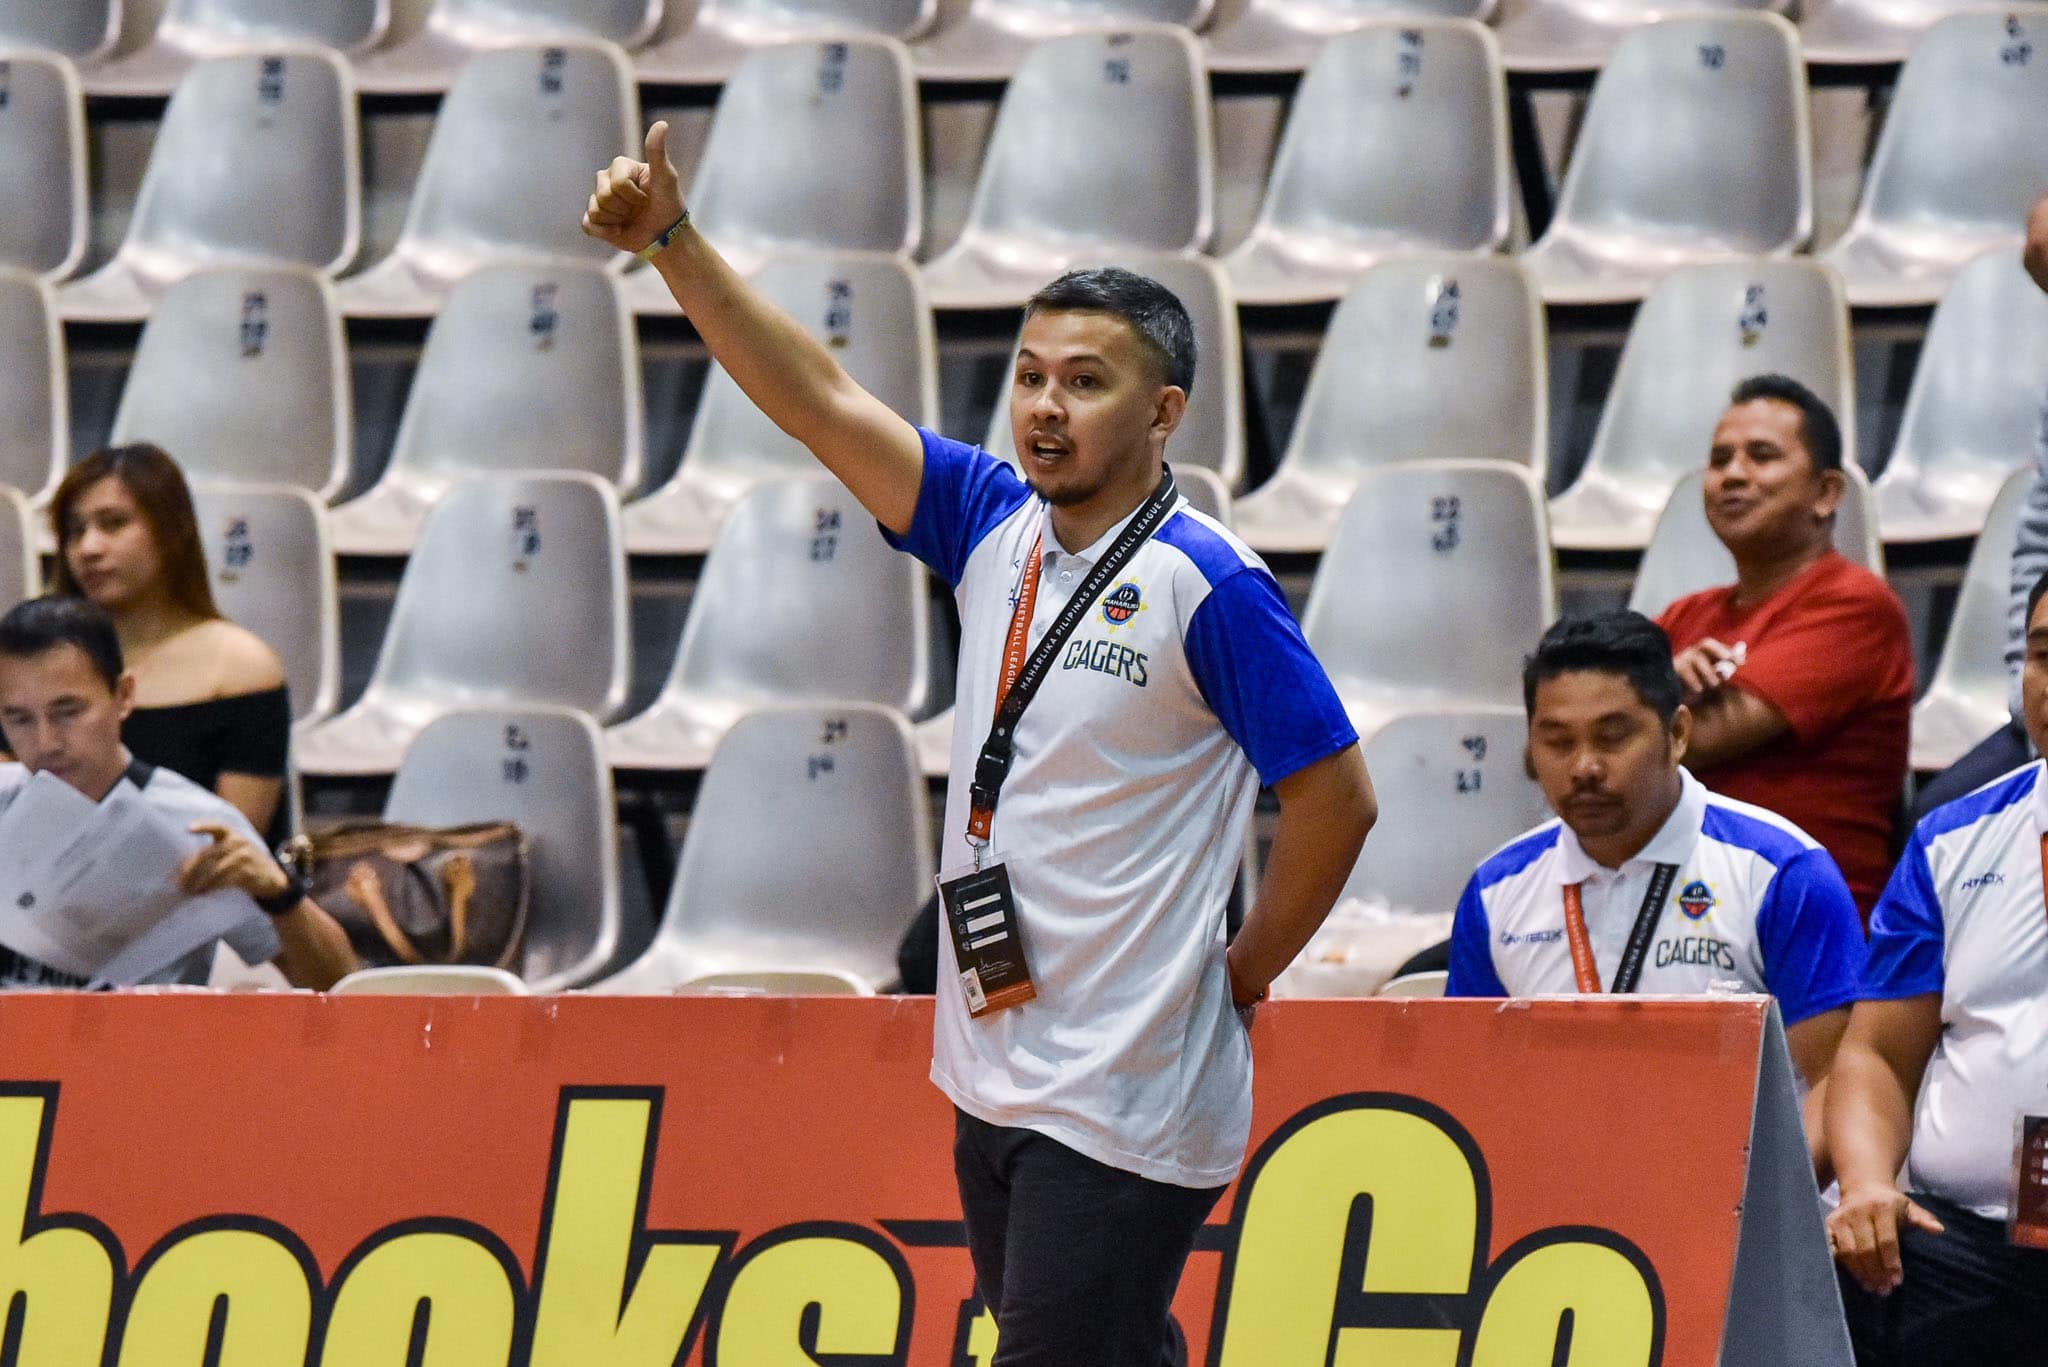 2020-Chooks-to-Go-MPBL-Lakan-Season-Zamboanga-def-Muntinlupa-Chico-Tirona Louie Gonzalez out to bring back 'excellence' of Muntinlupa Cagers Basketball MPBL News  - philippine sports news